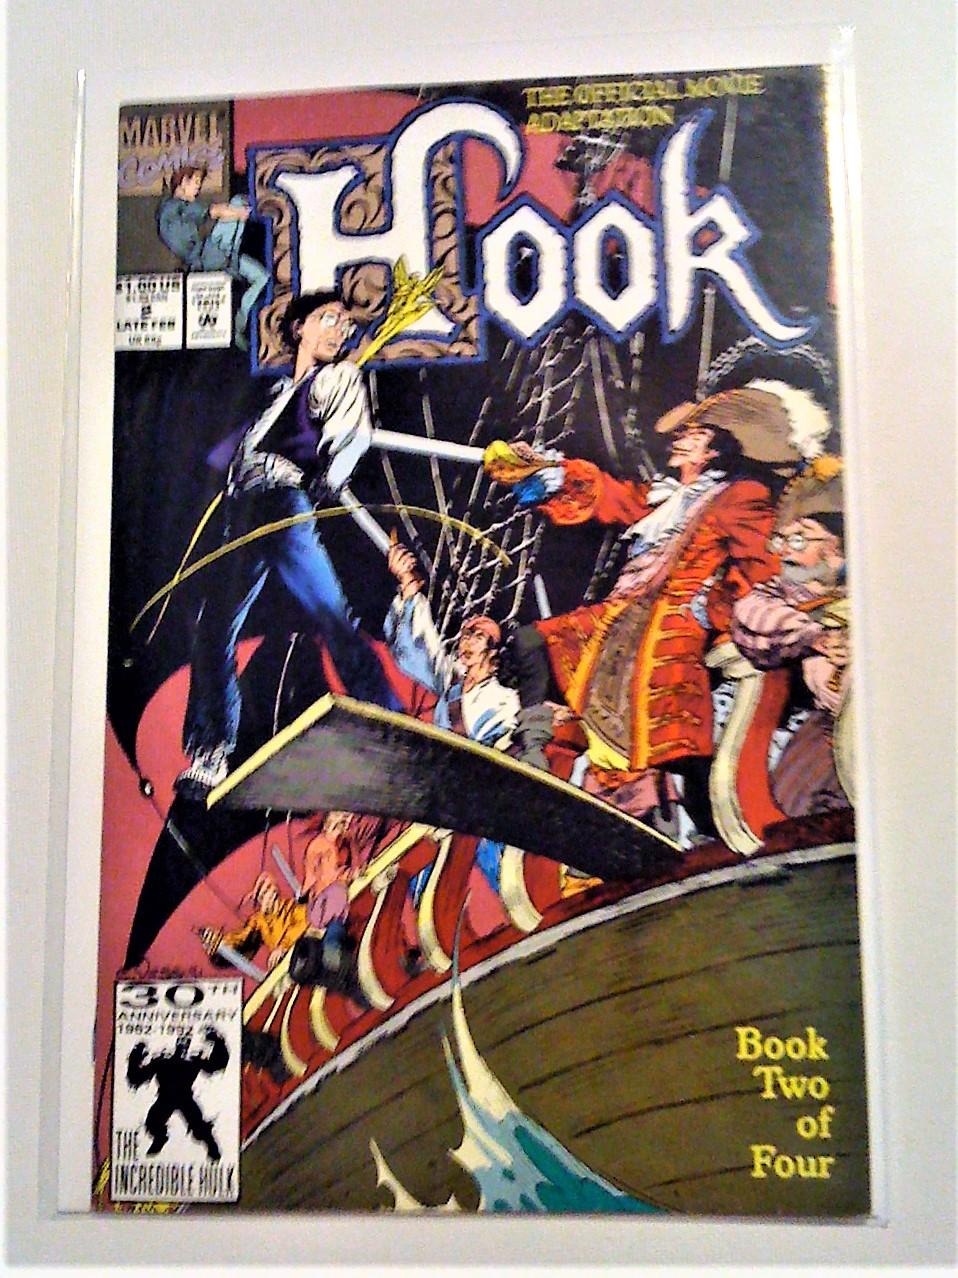 Hook / The Official Movie Adaptation, no 1